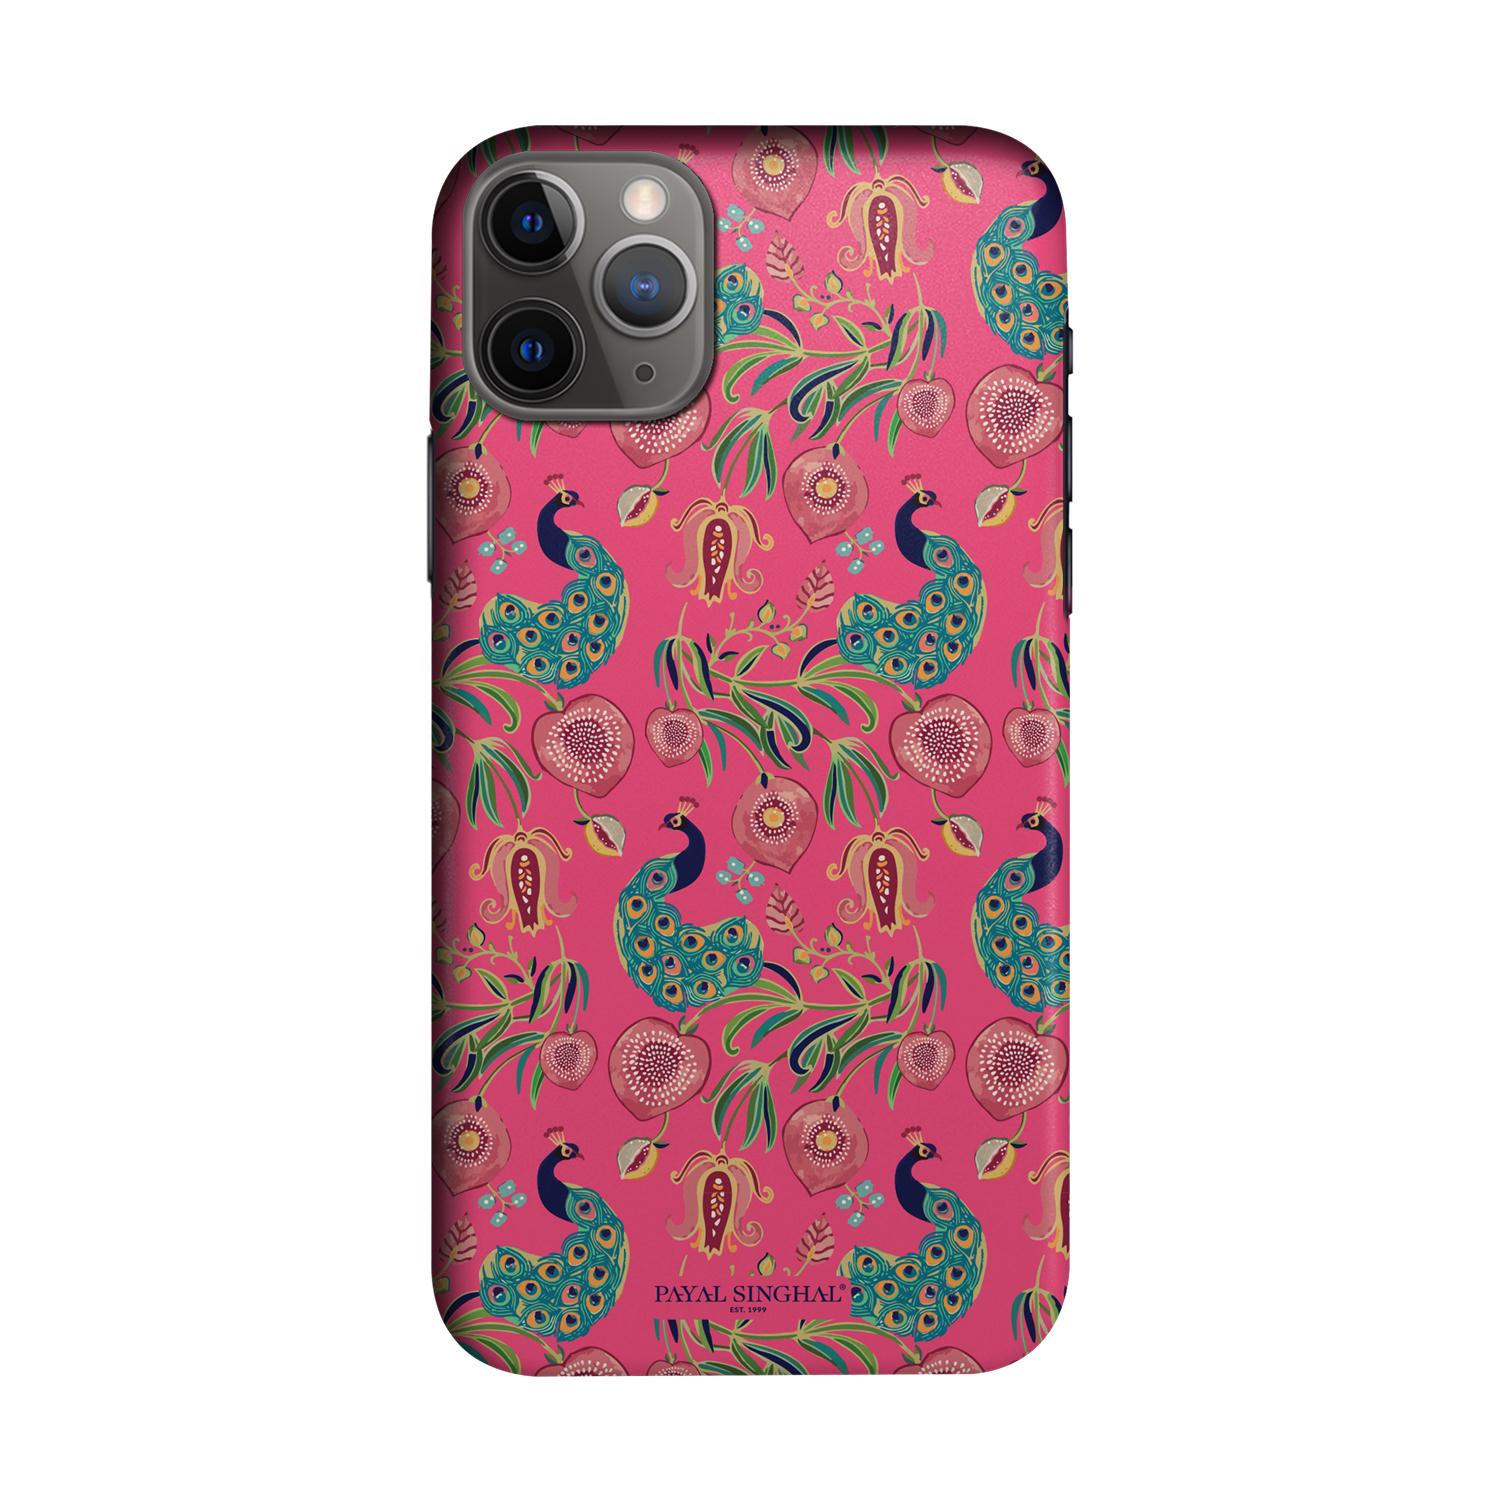 Payal Singhal Anaar and Mor Pink - Sleek Phone Case for iPhone 11 Pro Max